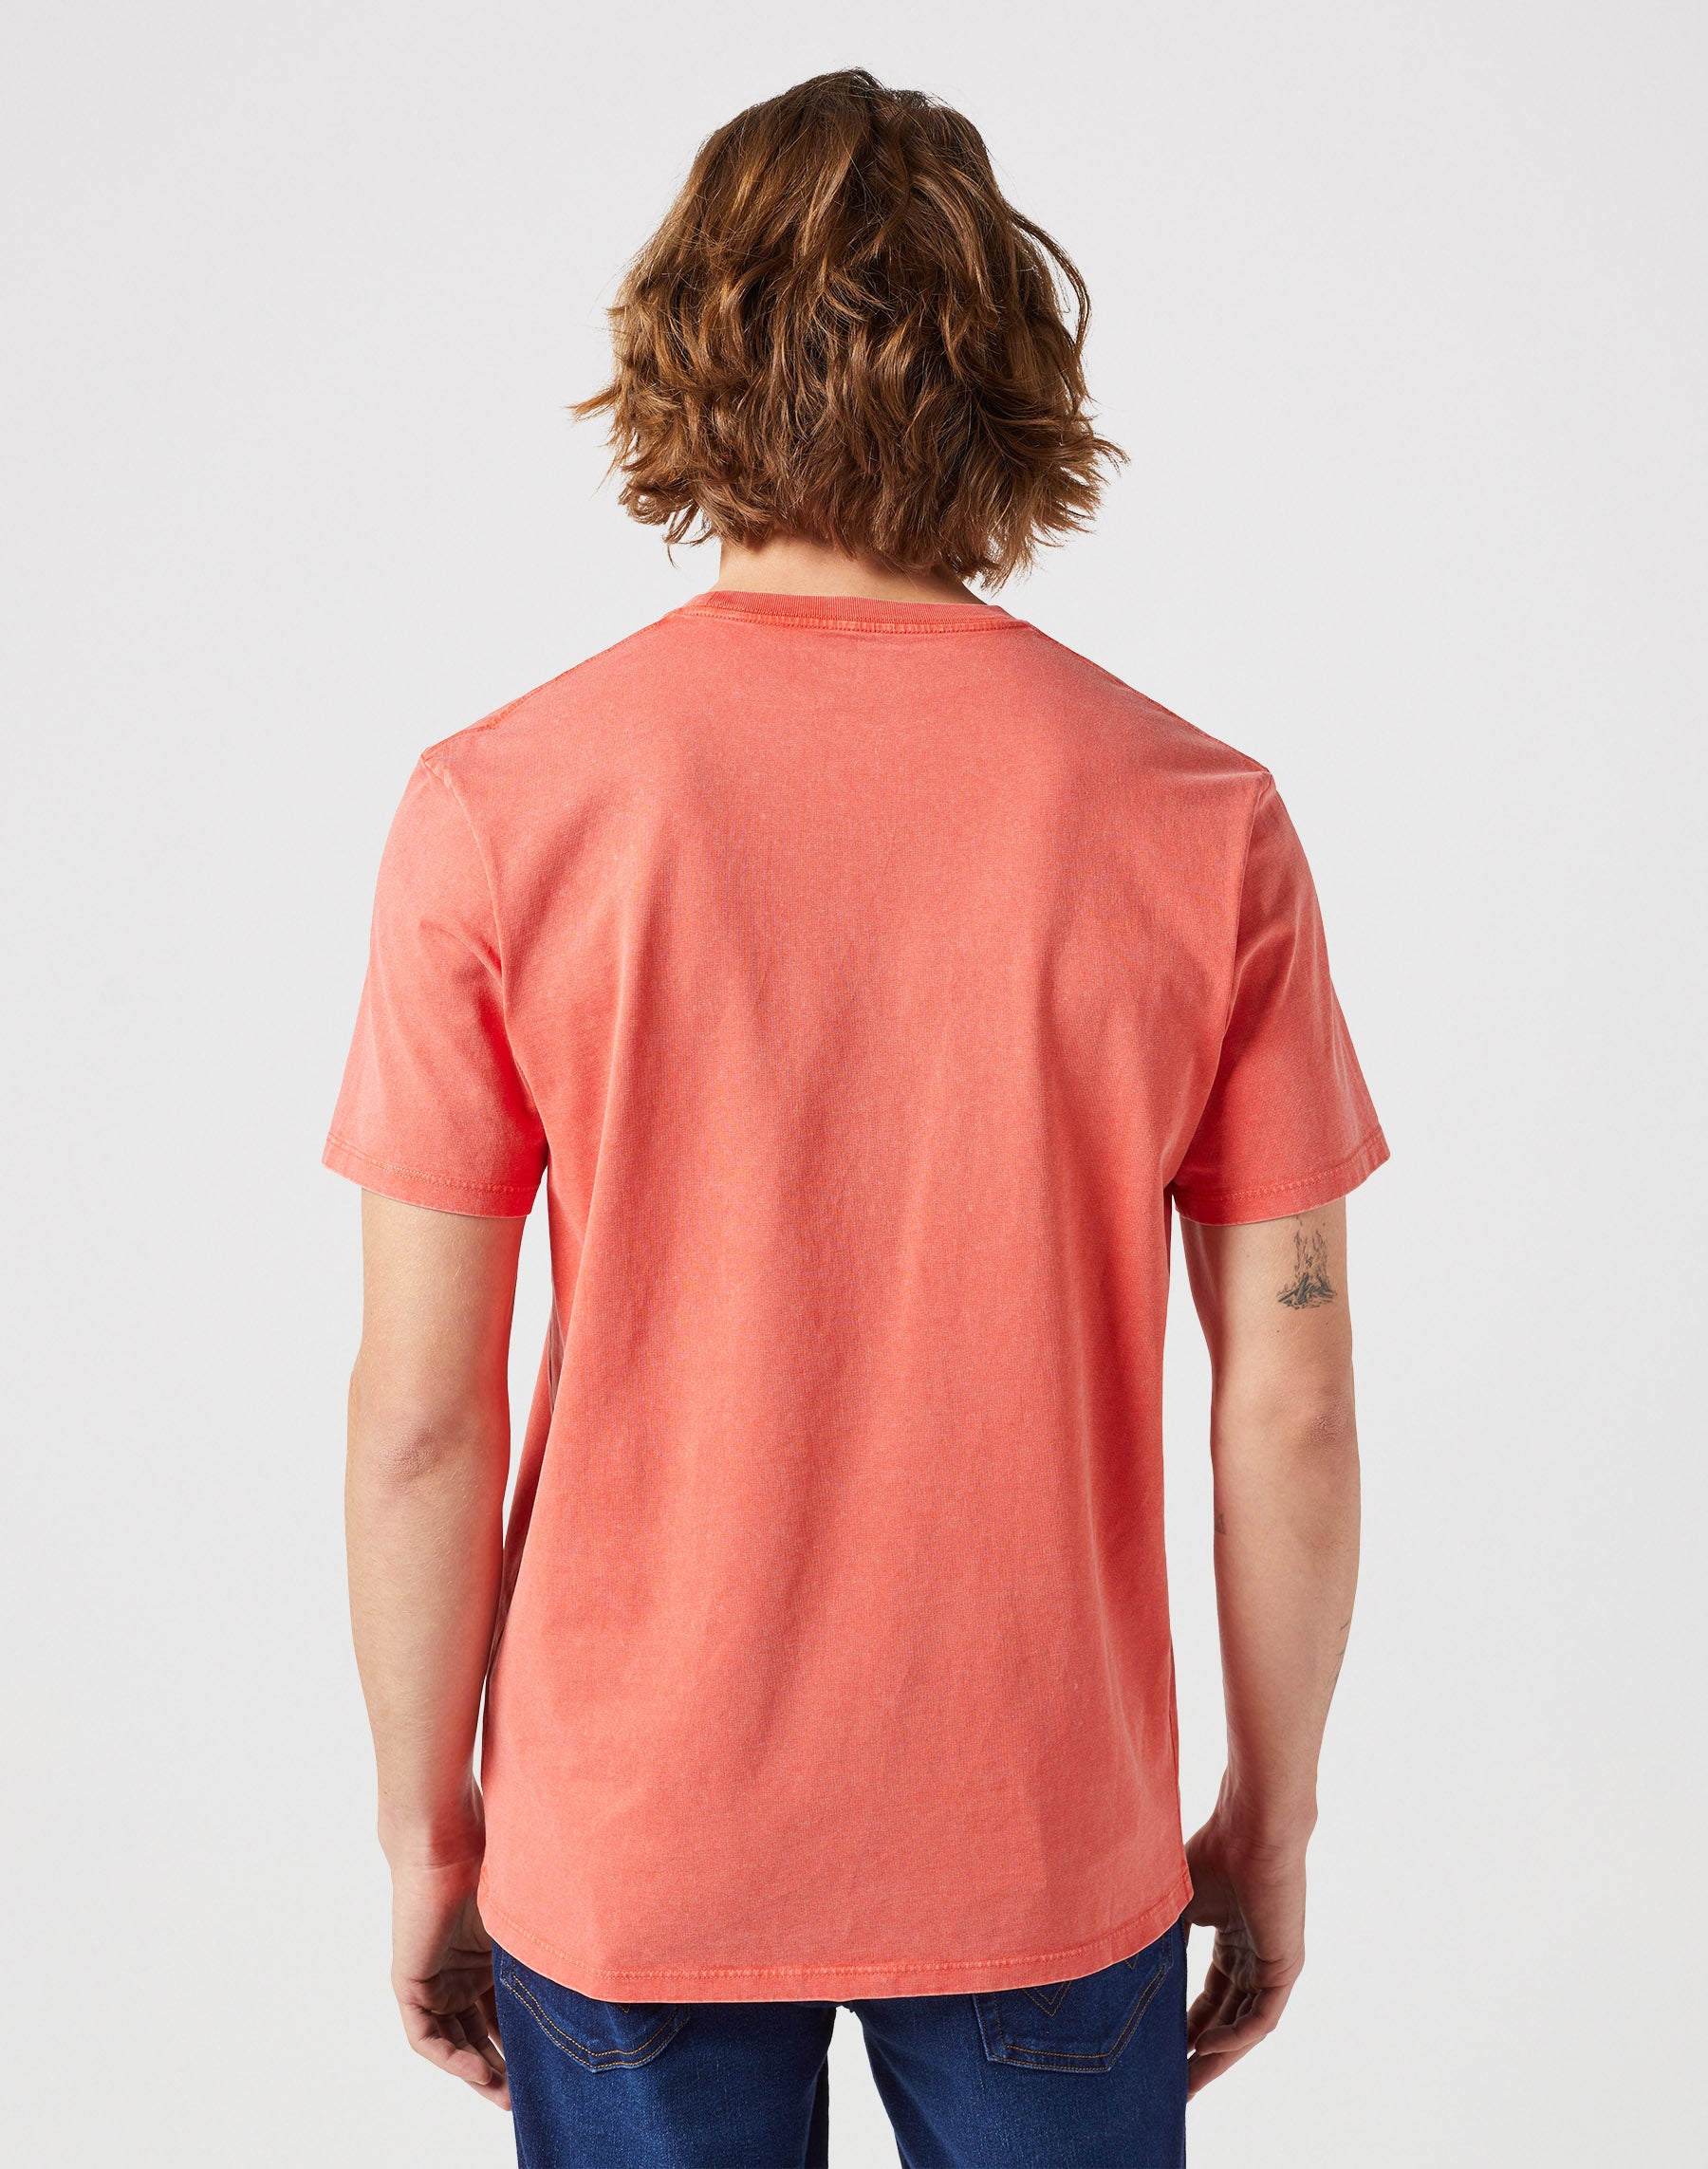 Graphic Tee in Burnt Sienna T-Shirts Wrangler   